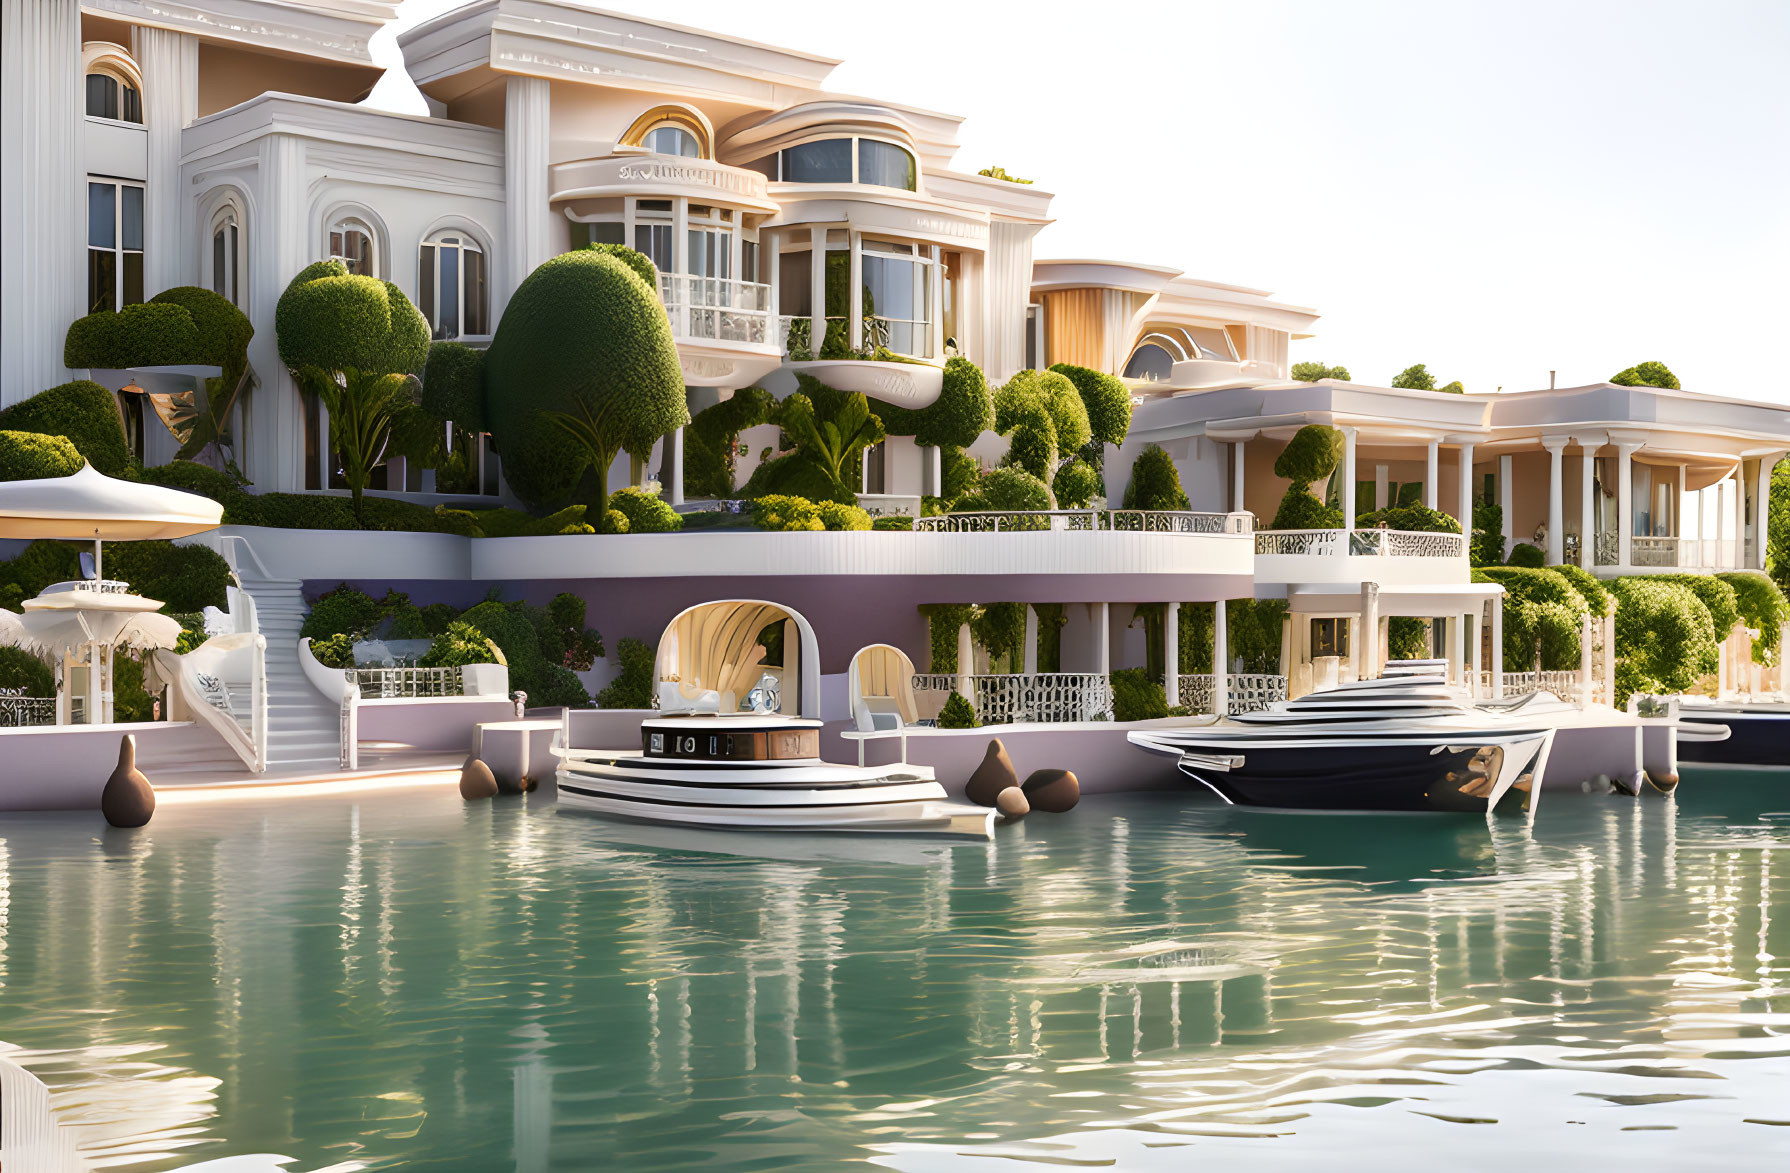 Elegant waterfront villas with manicured landscaping and private yachts in serene marina